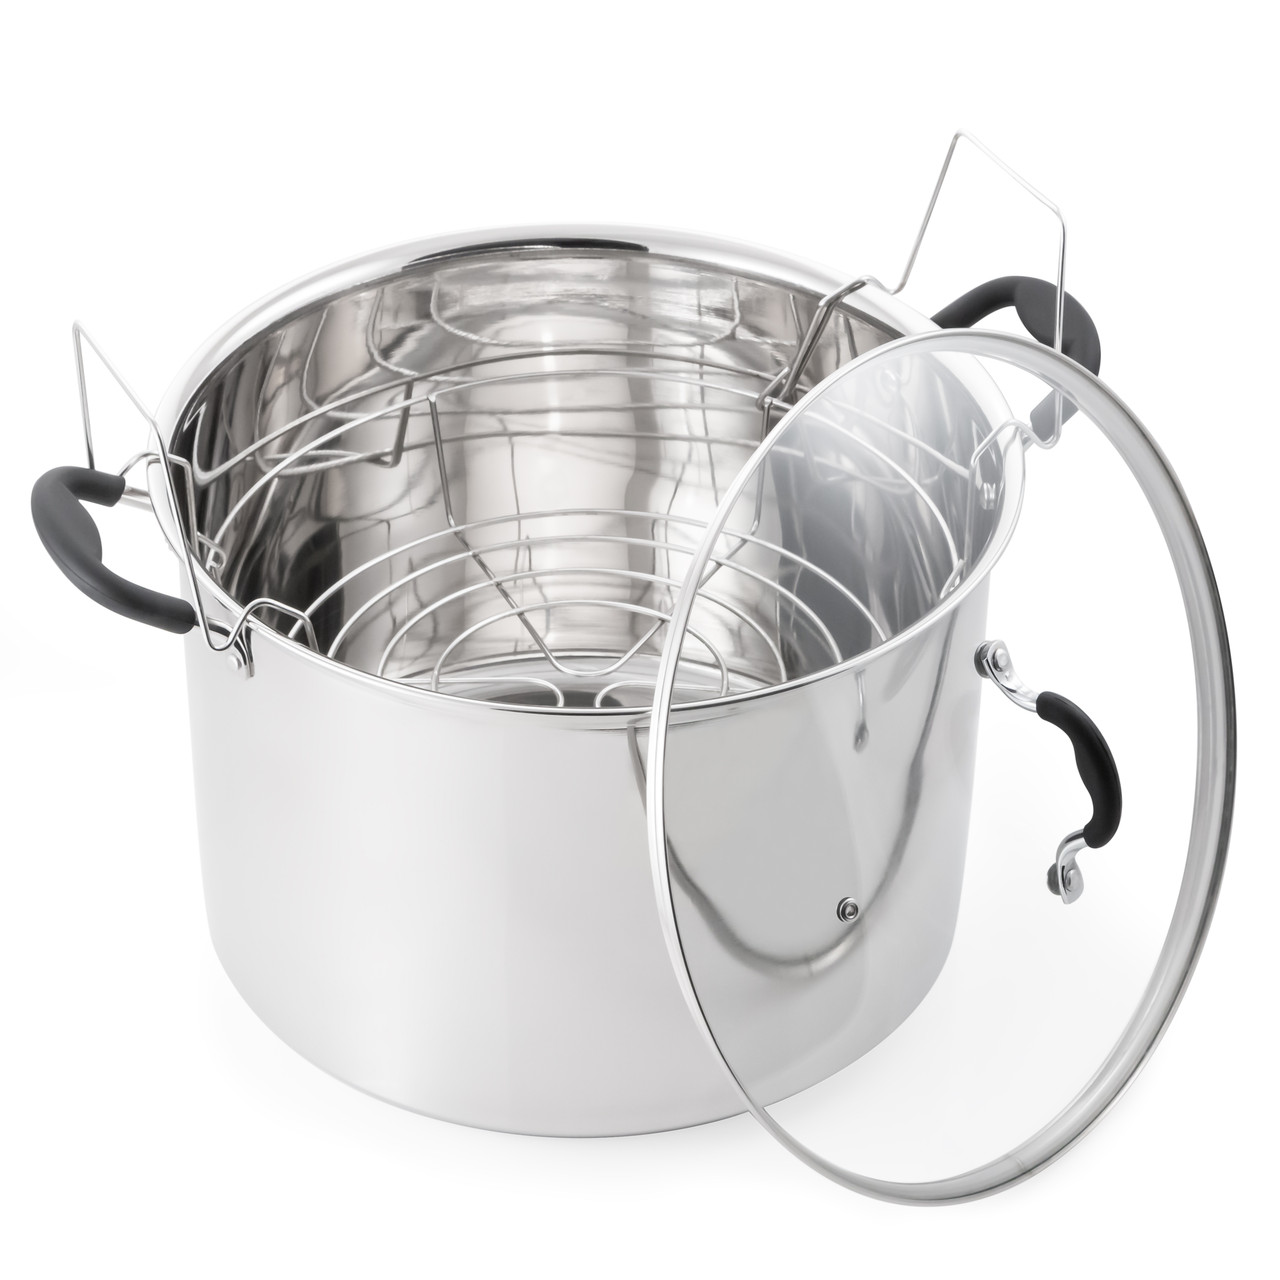 Stainless Steel Water Bath Canner